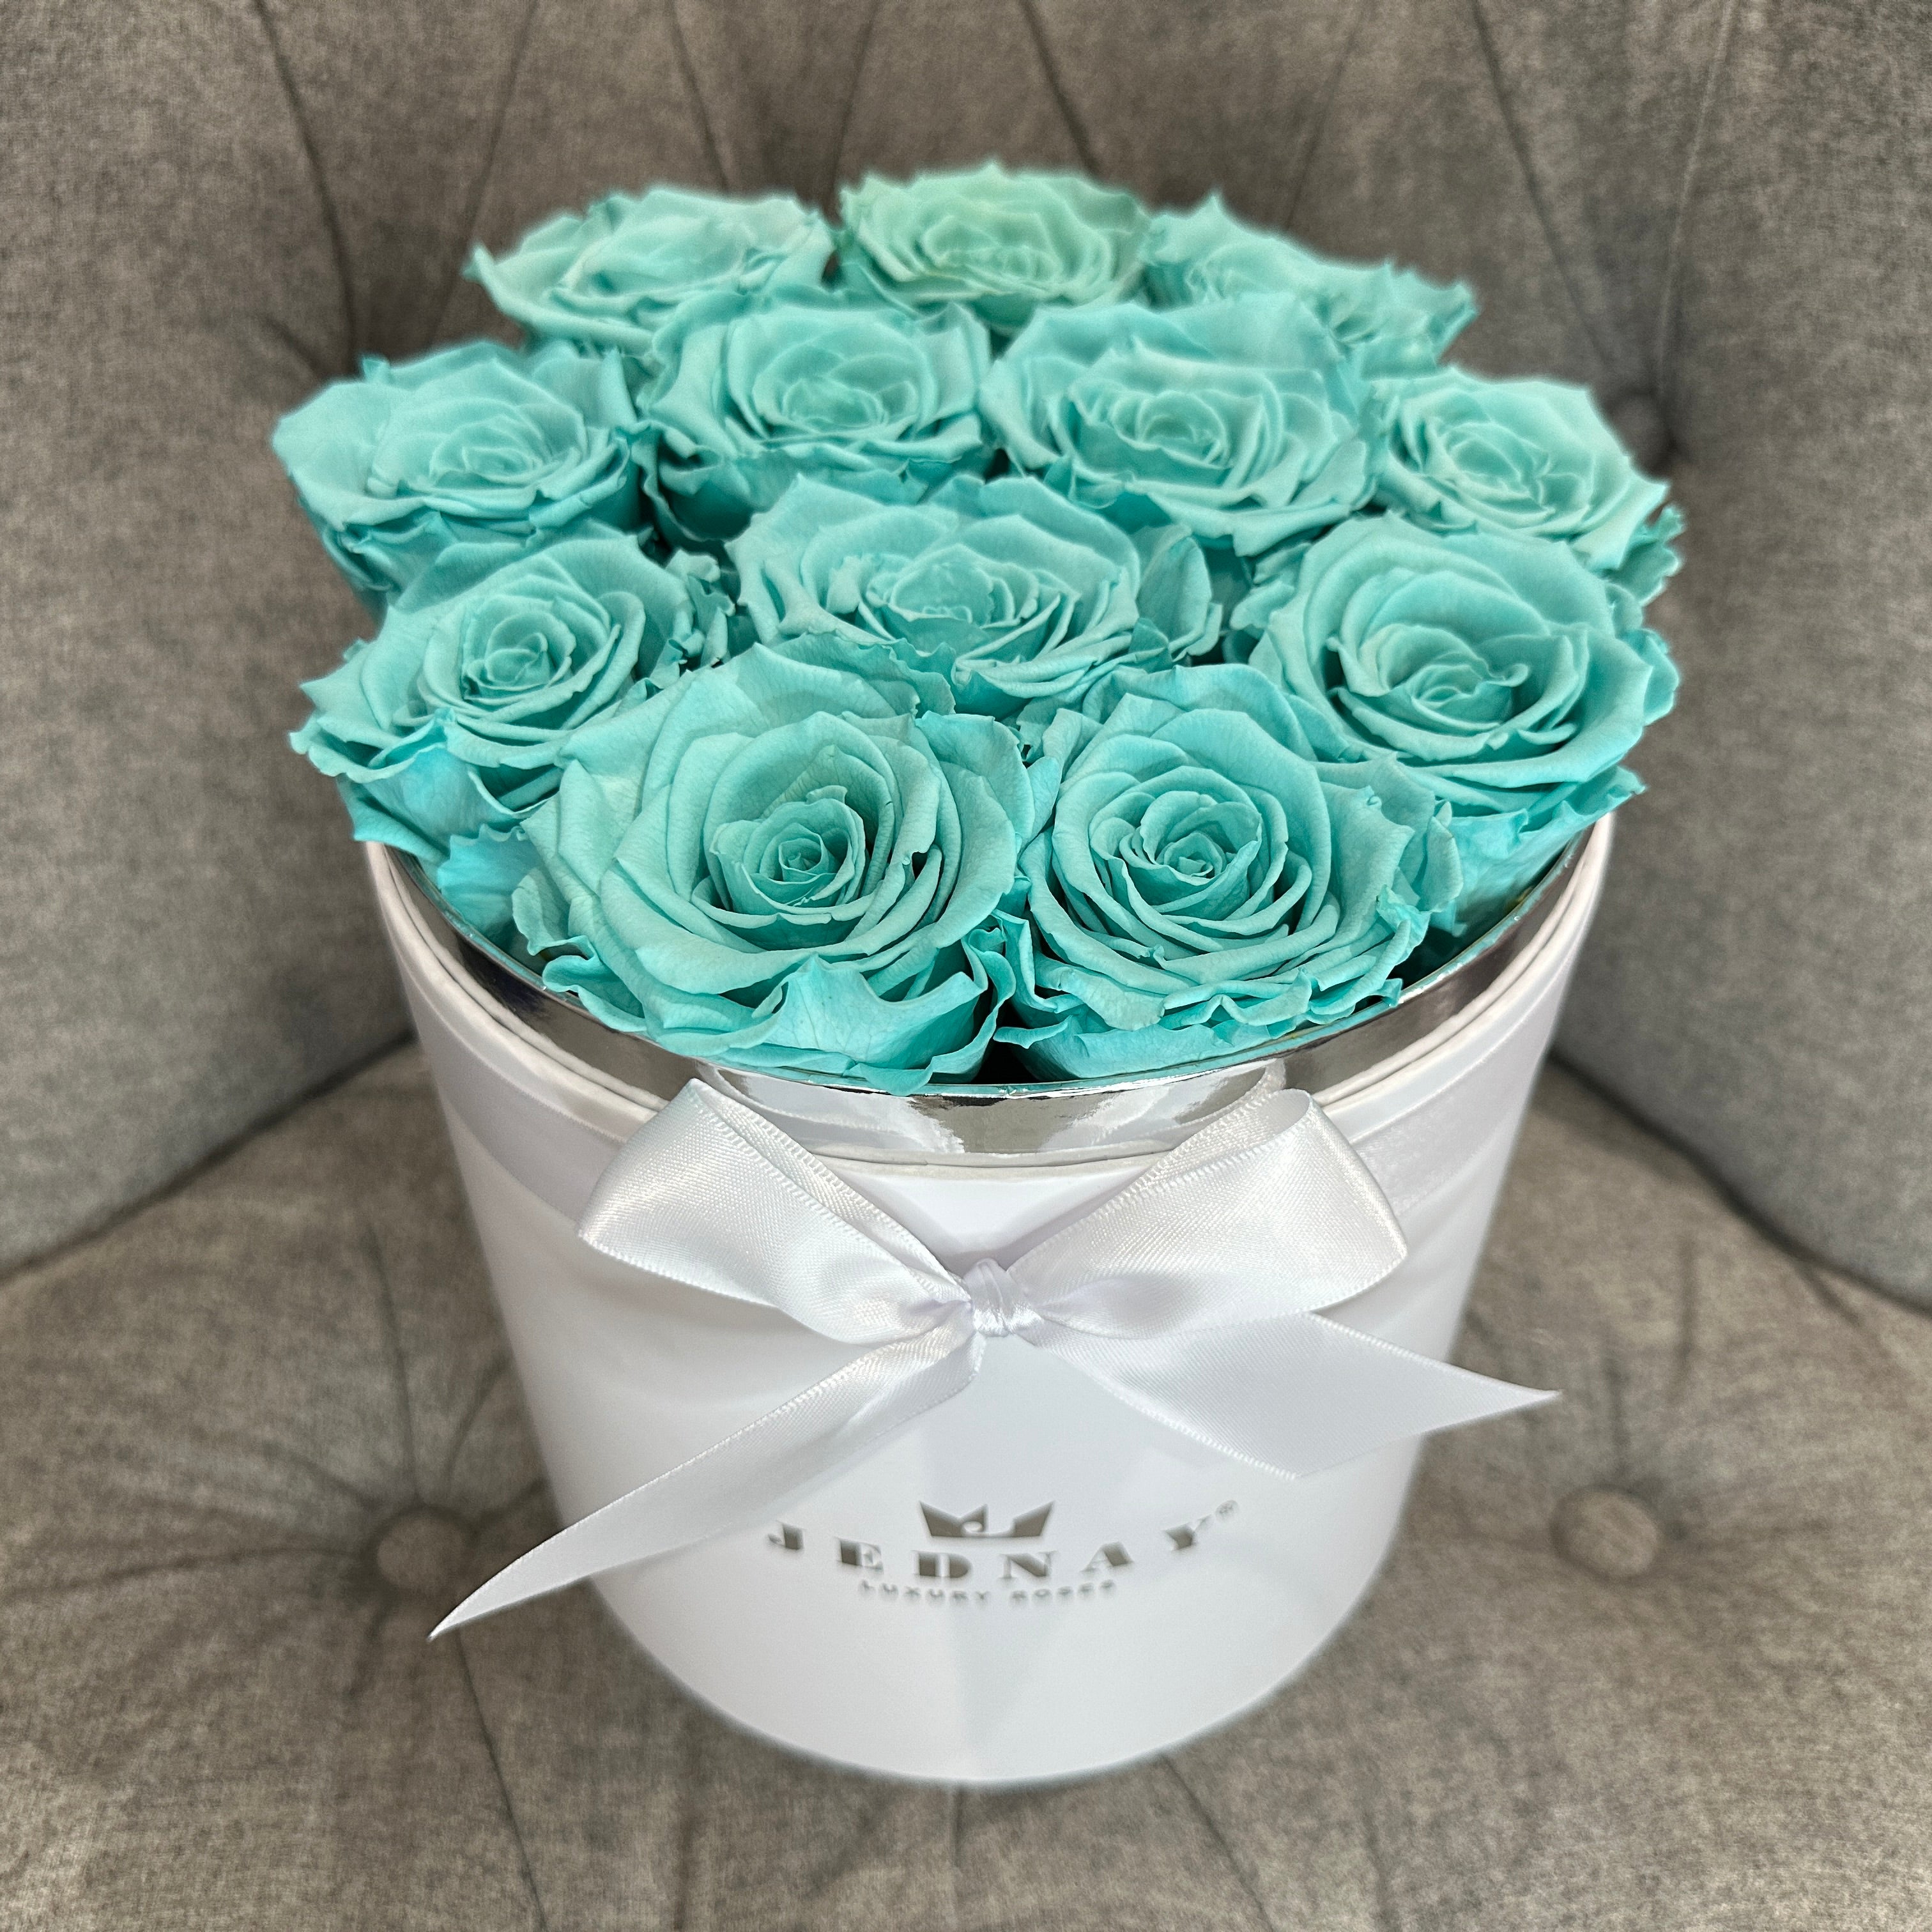 Tiffany blue eternal roses in a large round white gift box | Jednay 